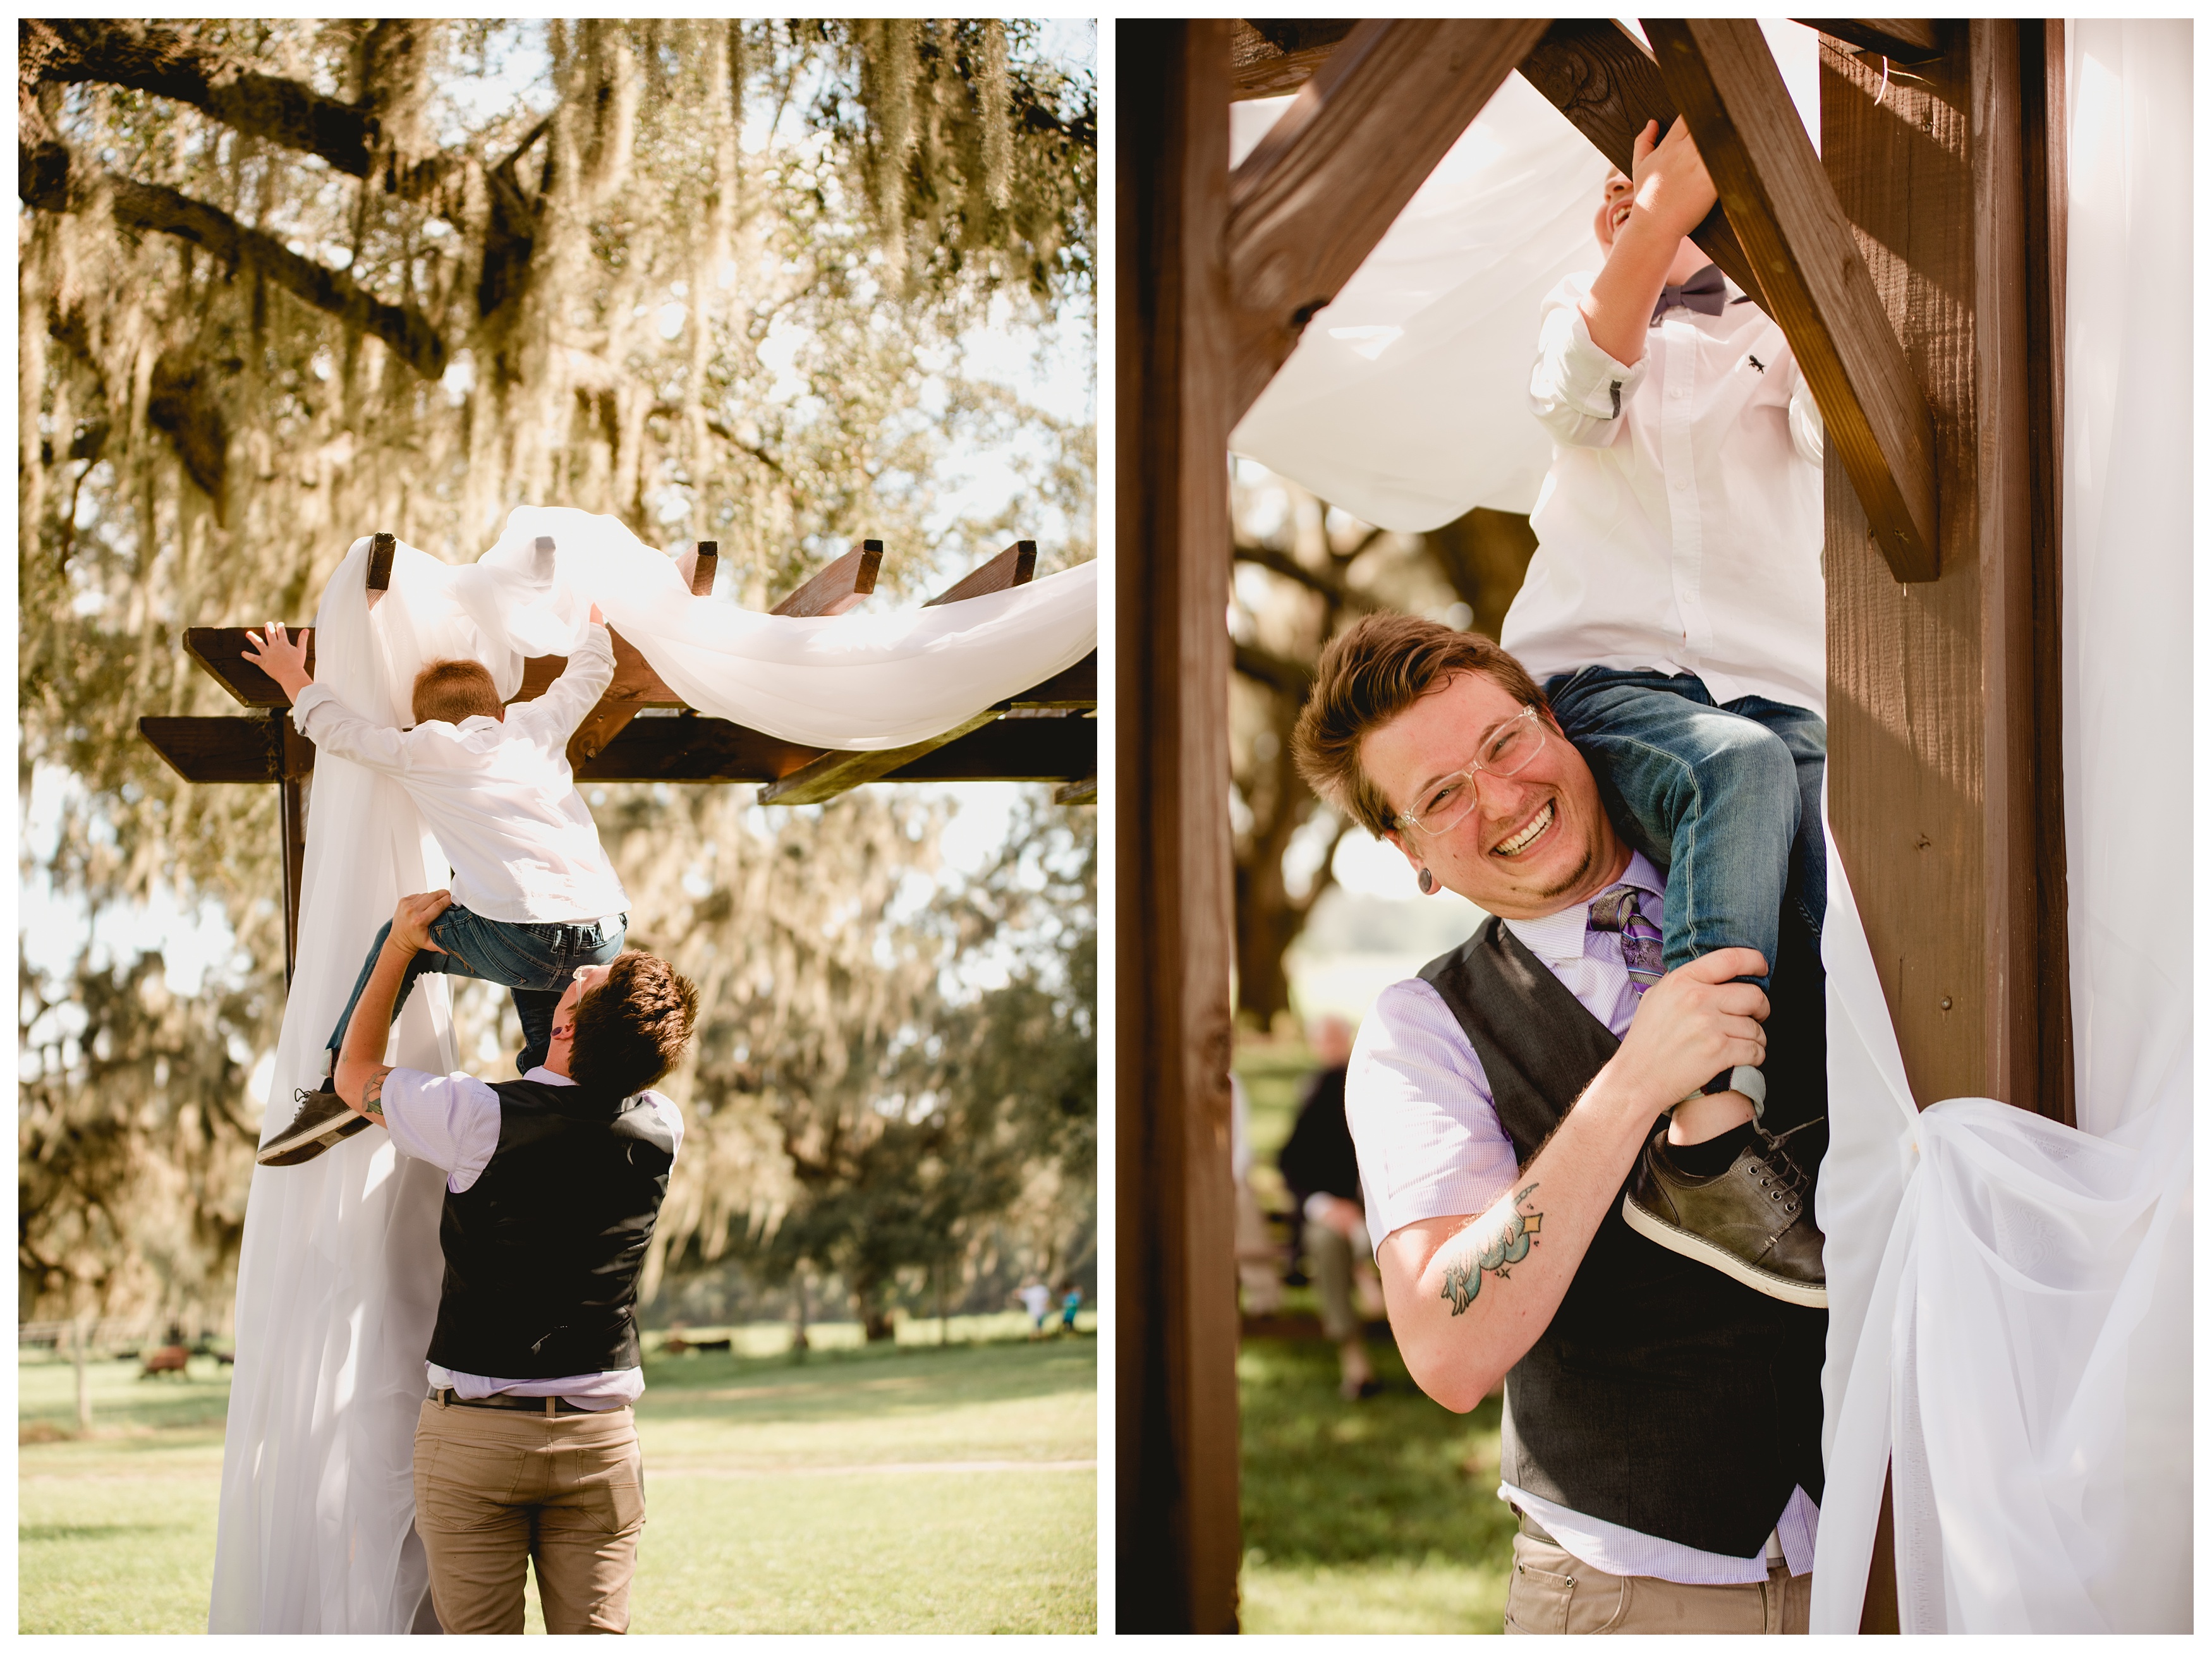 Candid wedding photographer specializing in natural moments. North Florida Shelly Williams Photography